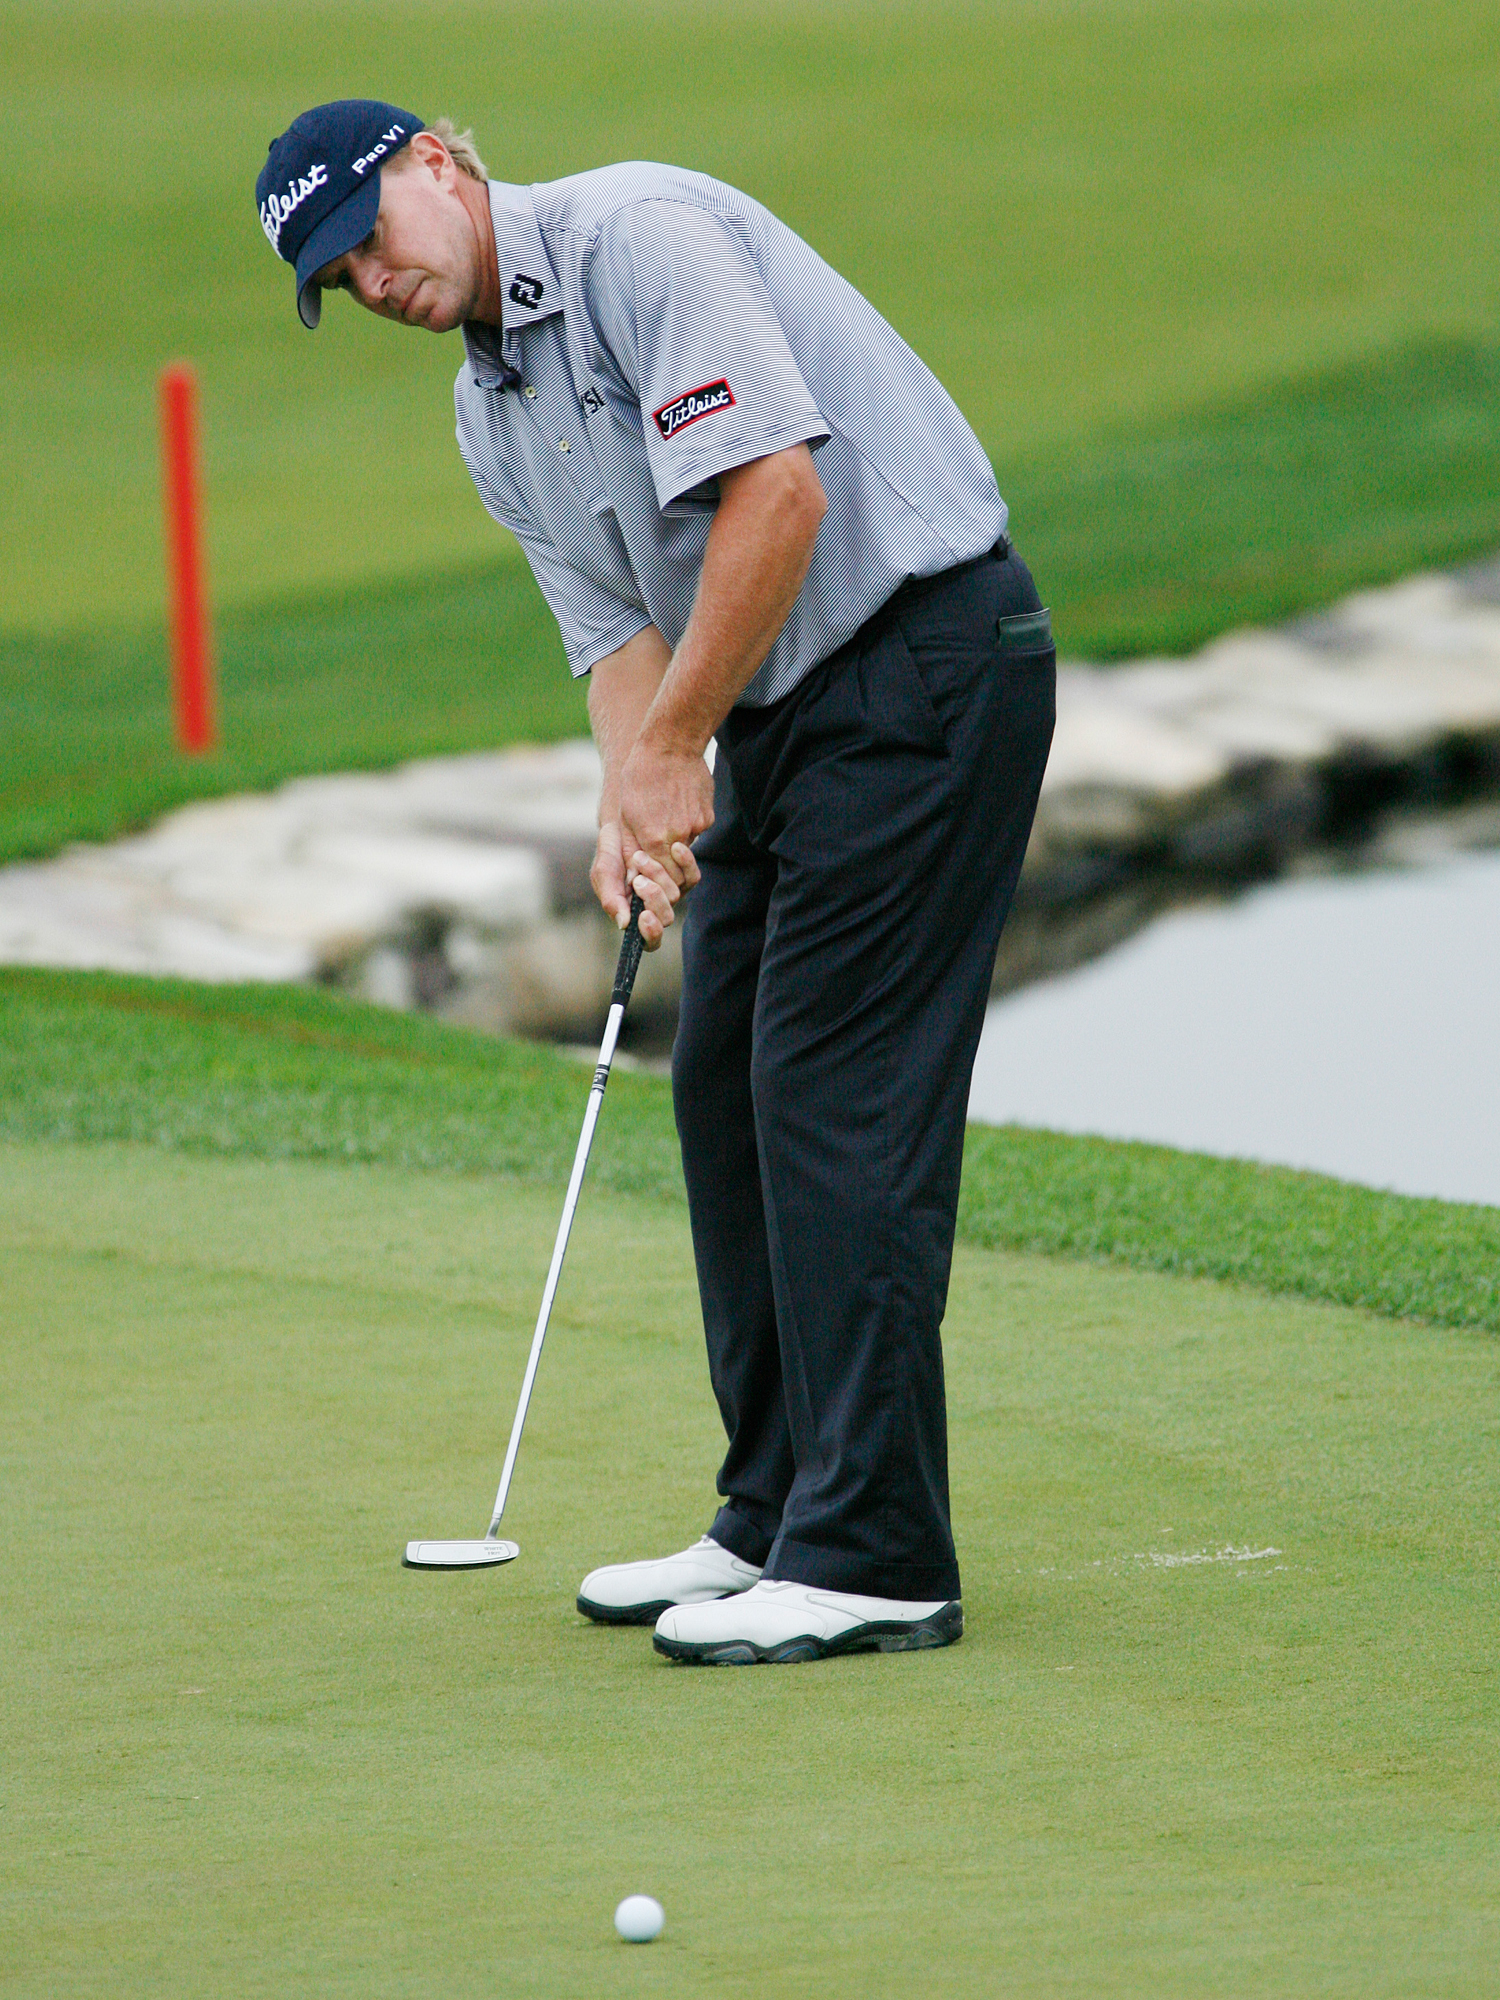 Stricker had the touch on the greens